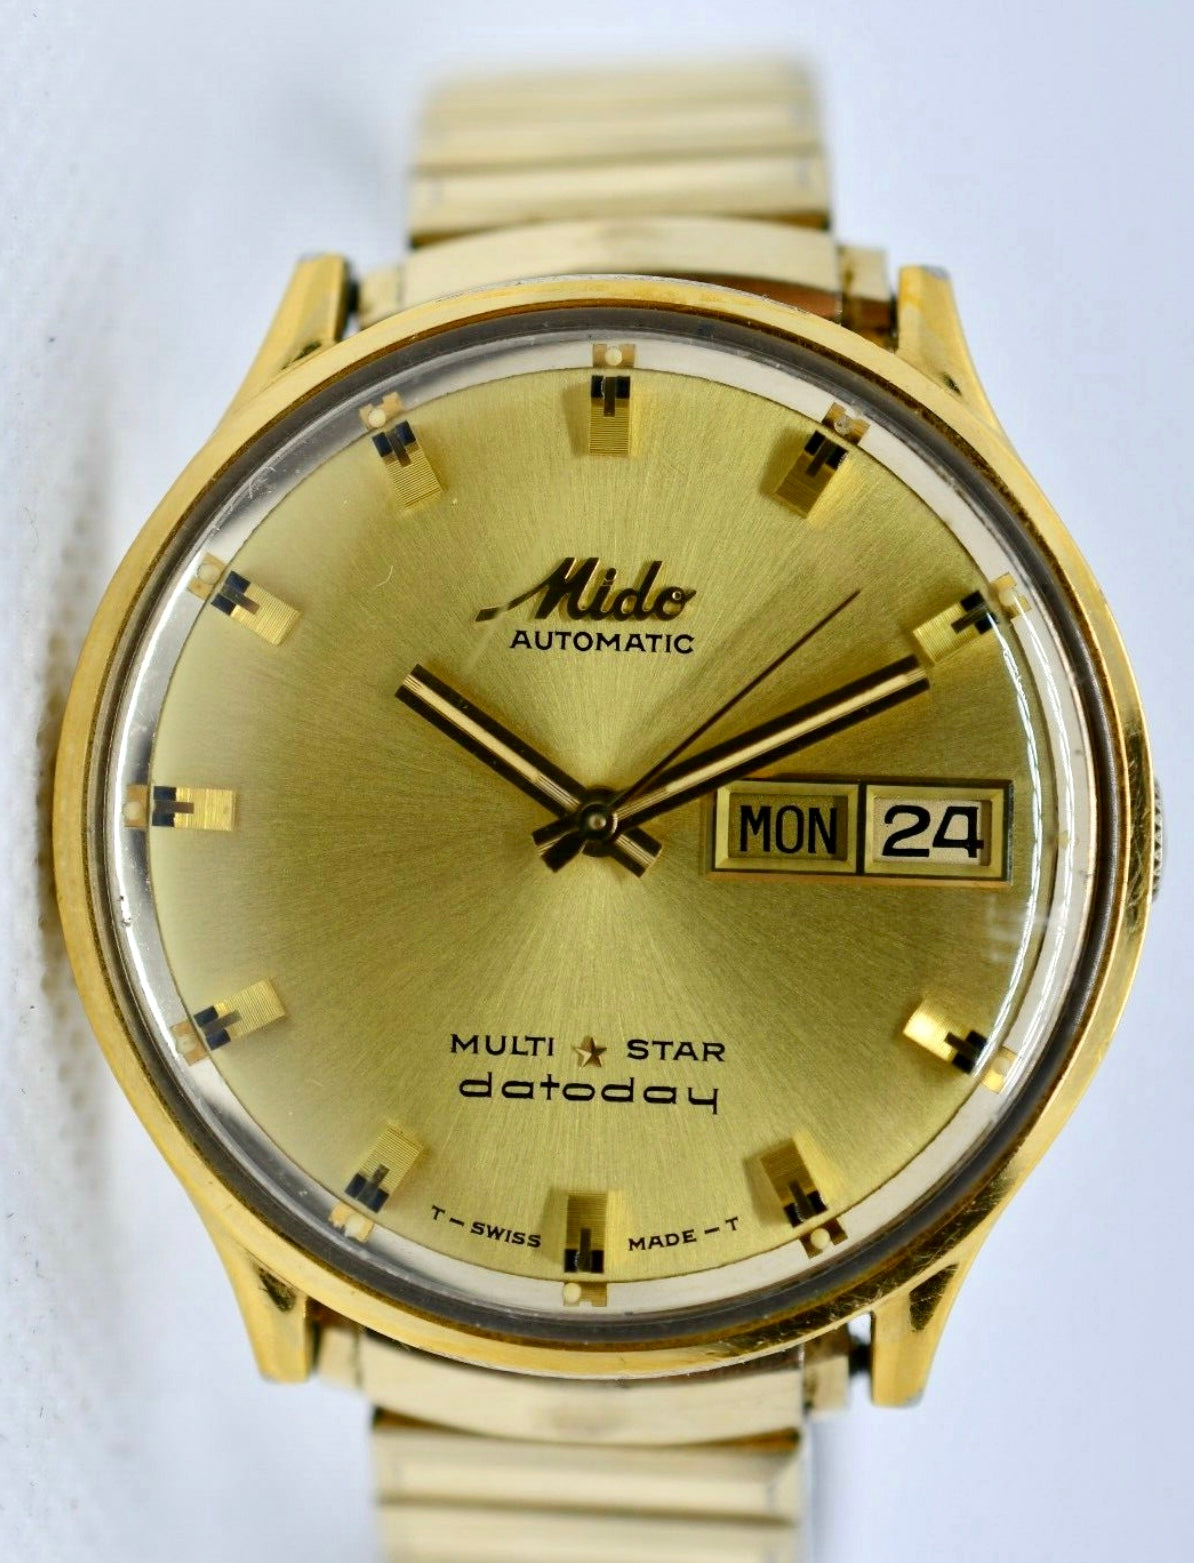 MIDO OCEAN STAR DATODAY GOLD DIAL GOLD PLAQUE CASE DAY DATE STRAP WATCH BOX  SET